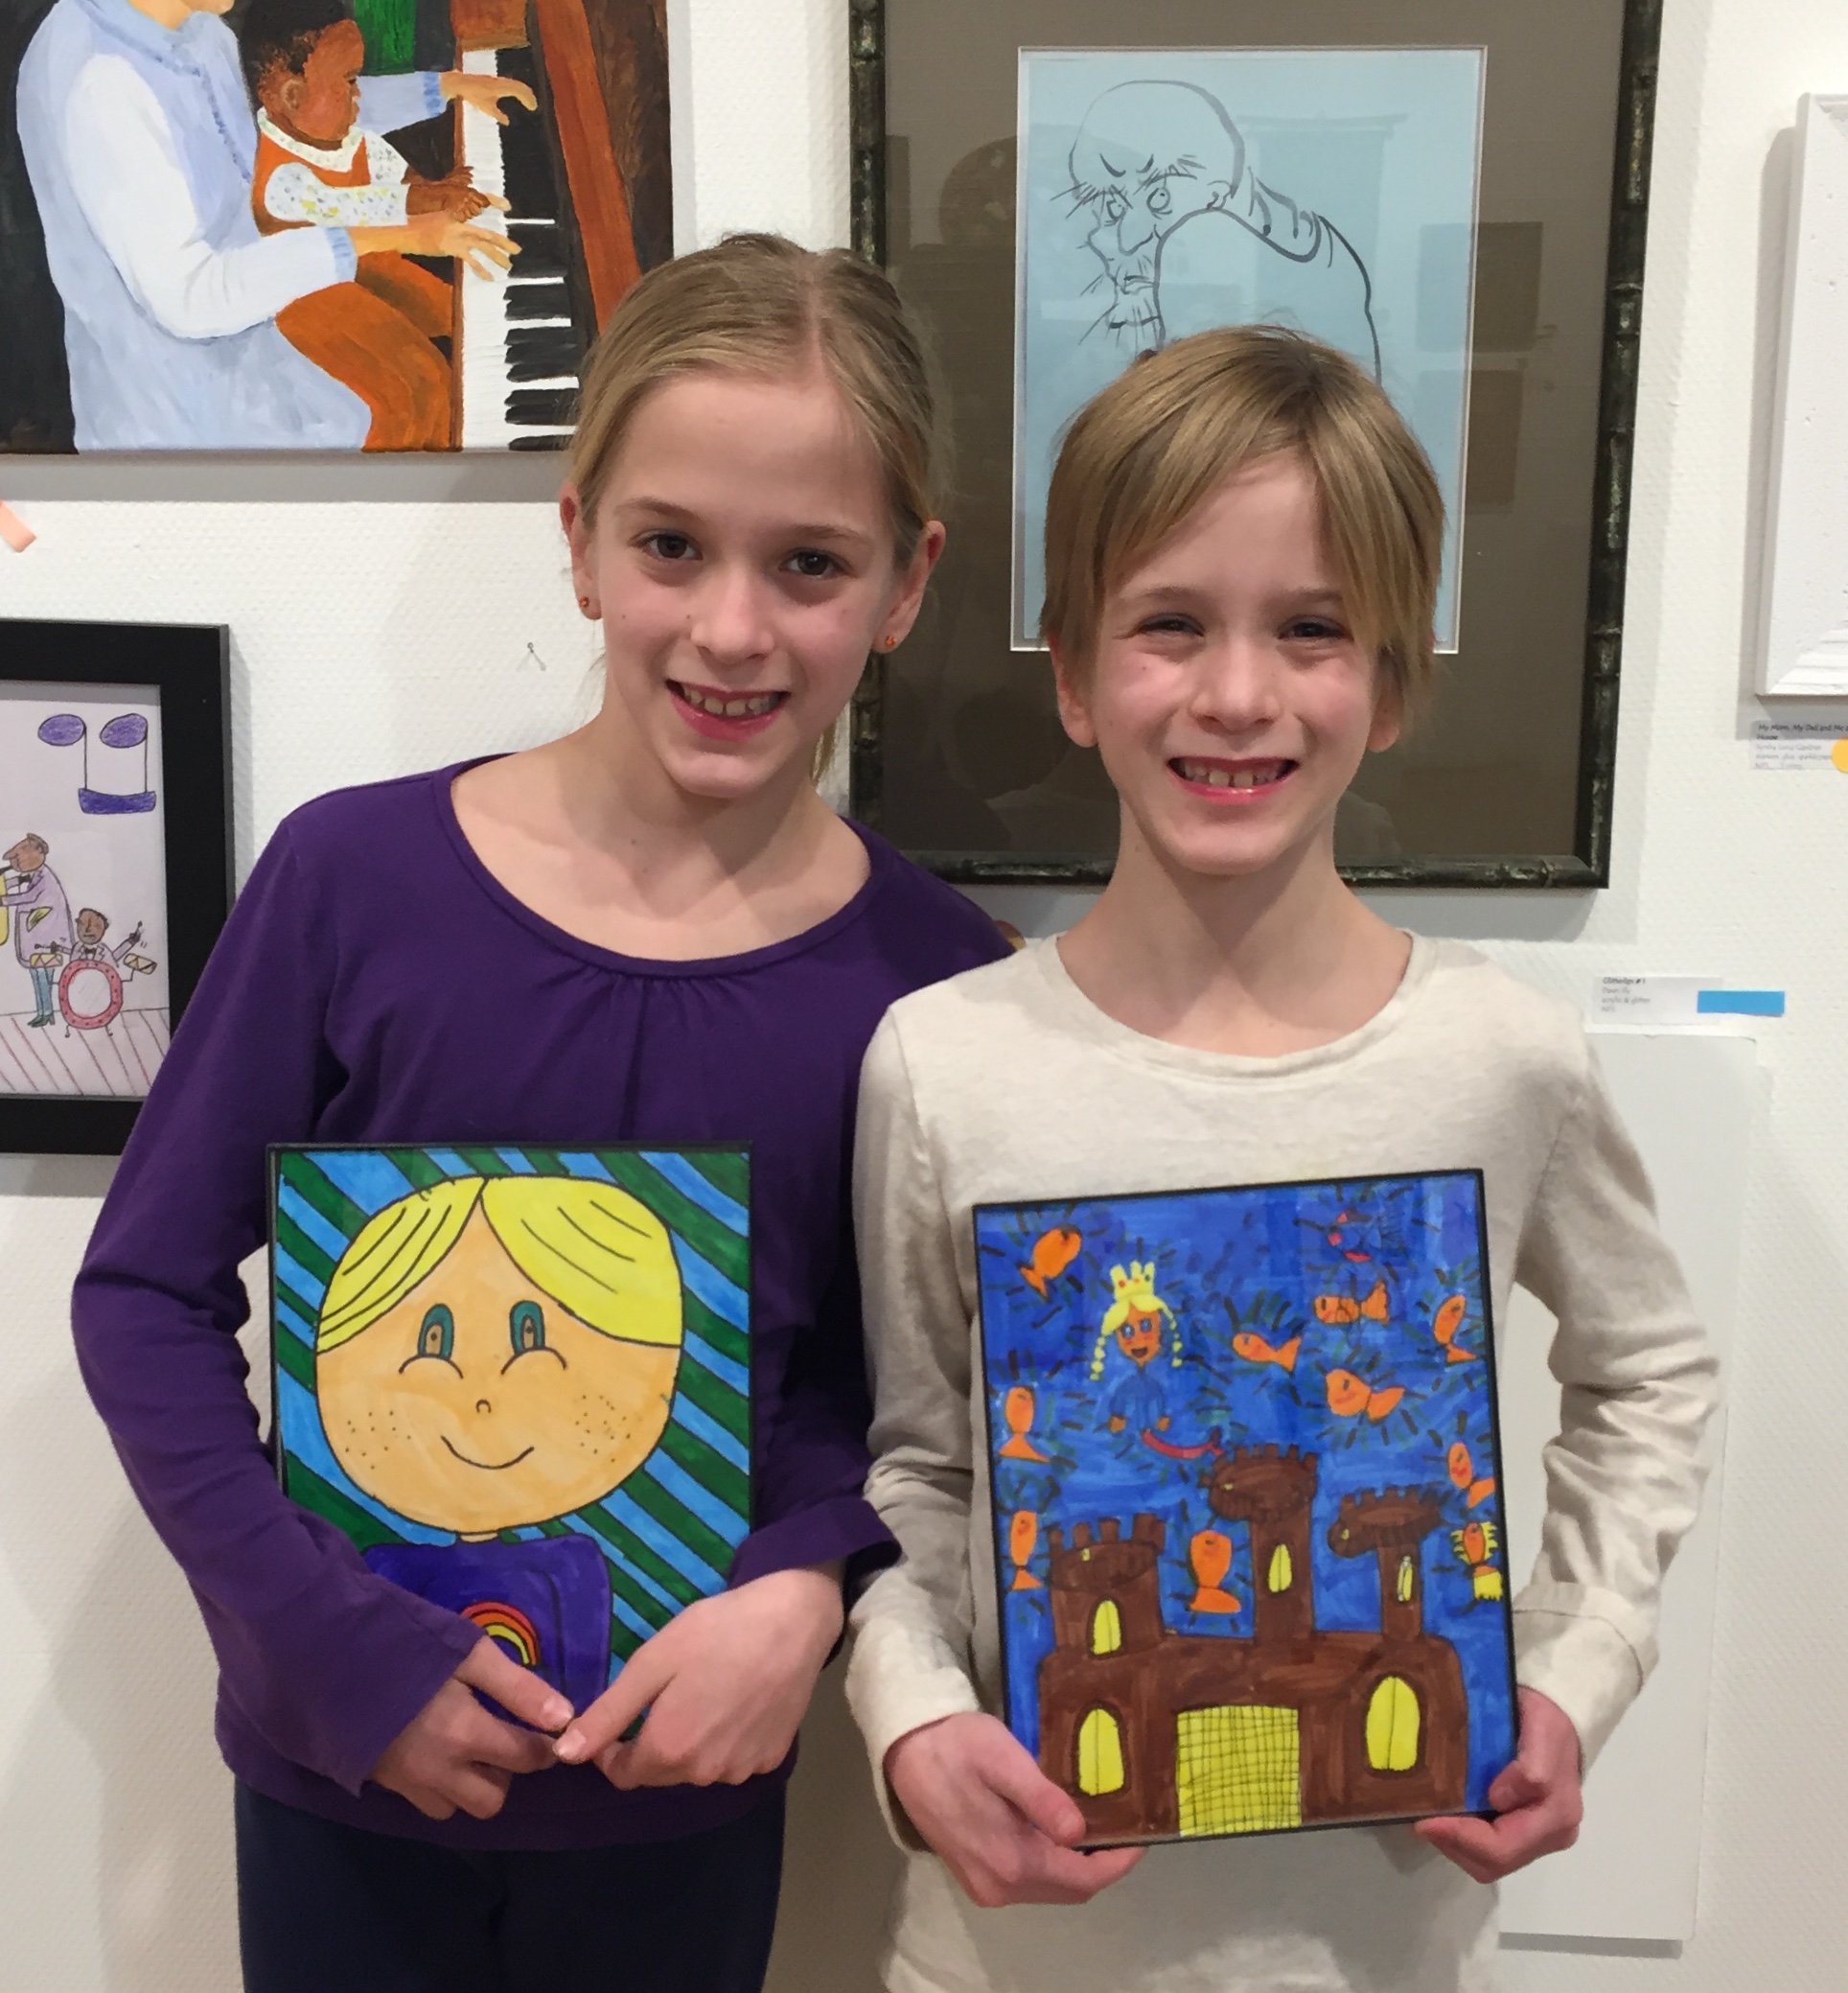 Photo of two 9 year olds holding artwork pieces in front of wall of artwork